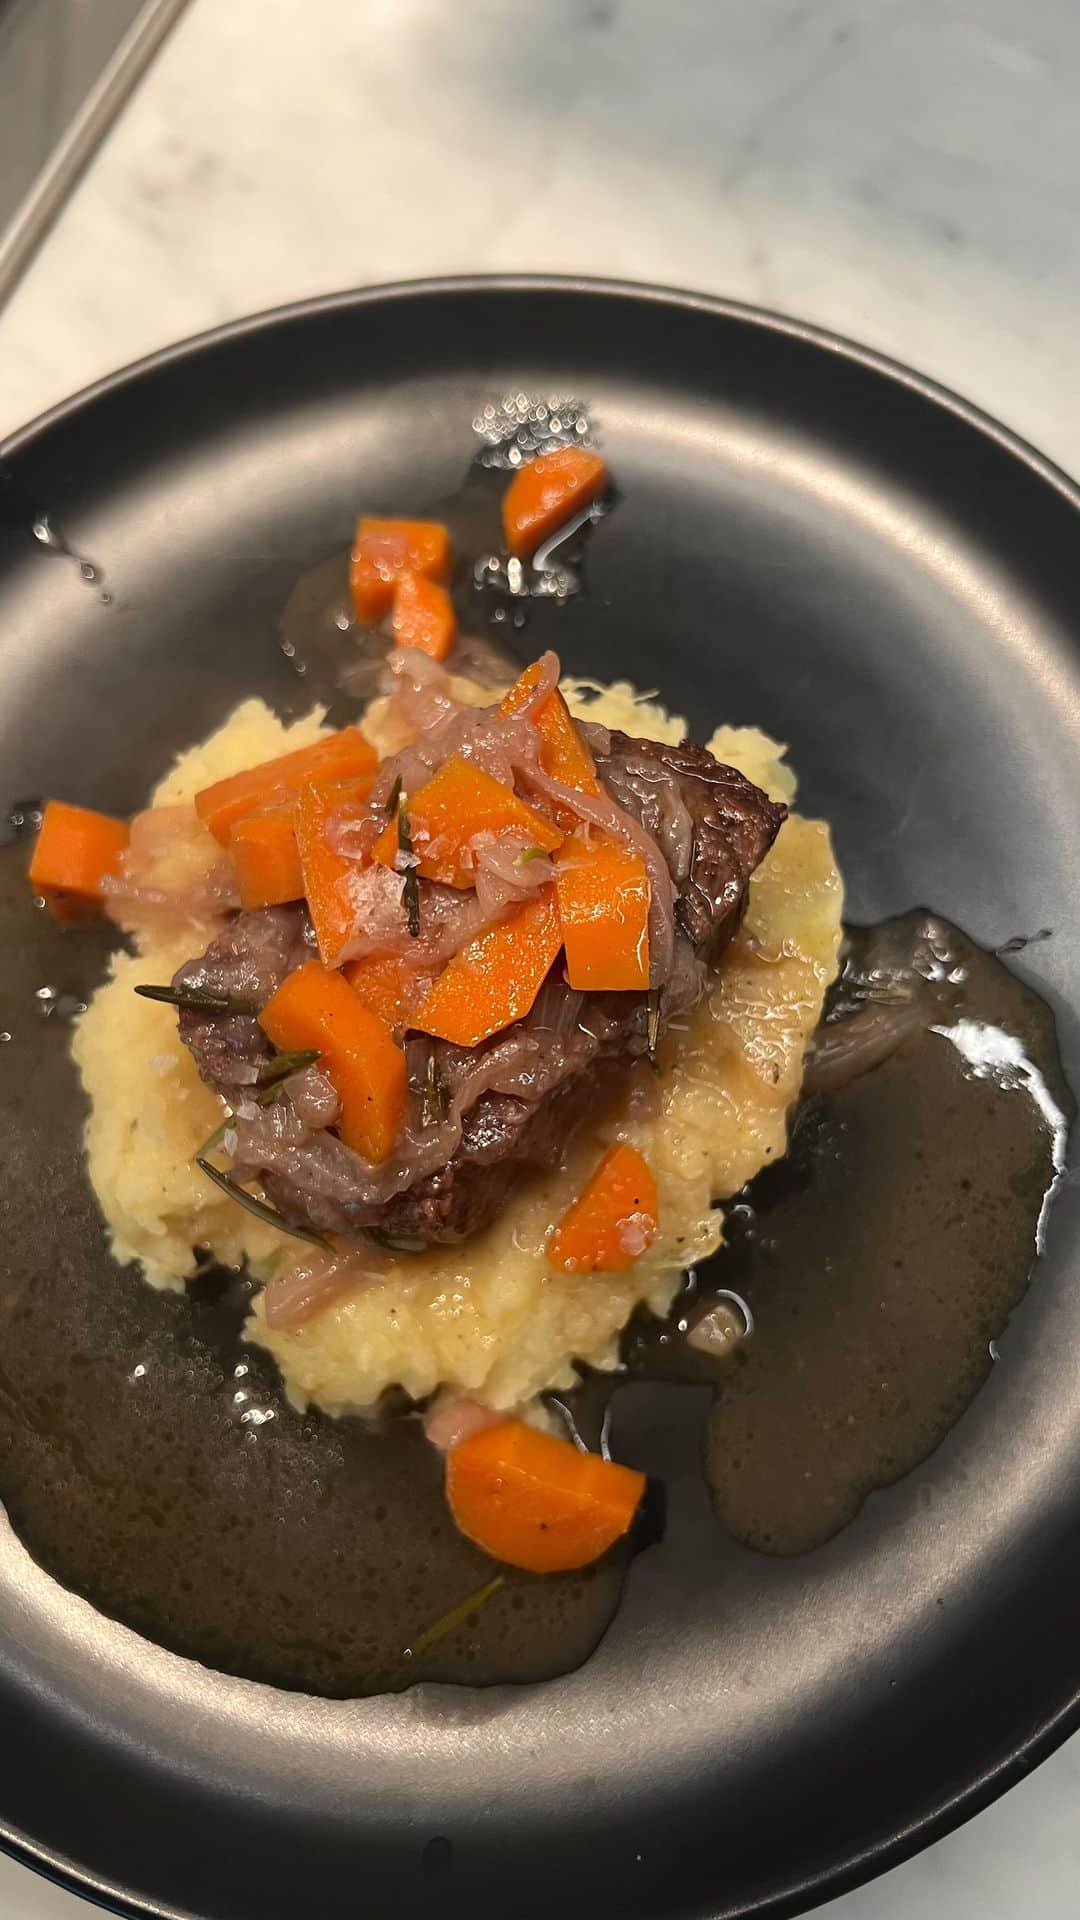 Taylor Howardのインスタグラム：「short ribs after a day at the barn 😋 - salt & pepper both sides of the (grass fed!!) meat.. sear in butter & set aside cook organic onions, carrots & shallots add in 1/2 cup of red wine & 1/2 cup of beef bone broth + salt & pepper.  add the short ribs back into pan, put fresh rosemary in. cook in oven on 350 for 2 hours.  also cooked garlic for the mash potatoes.  boil 2 sweet potatoes once done, mash & add in butter, garlic & s+p top with the tender meat & sprinkle on some sea salt flakes. SO GOOD!!」